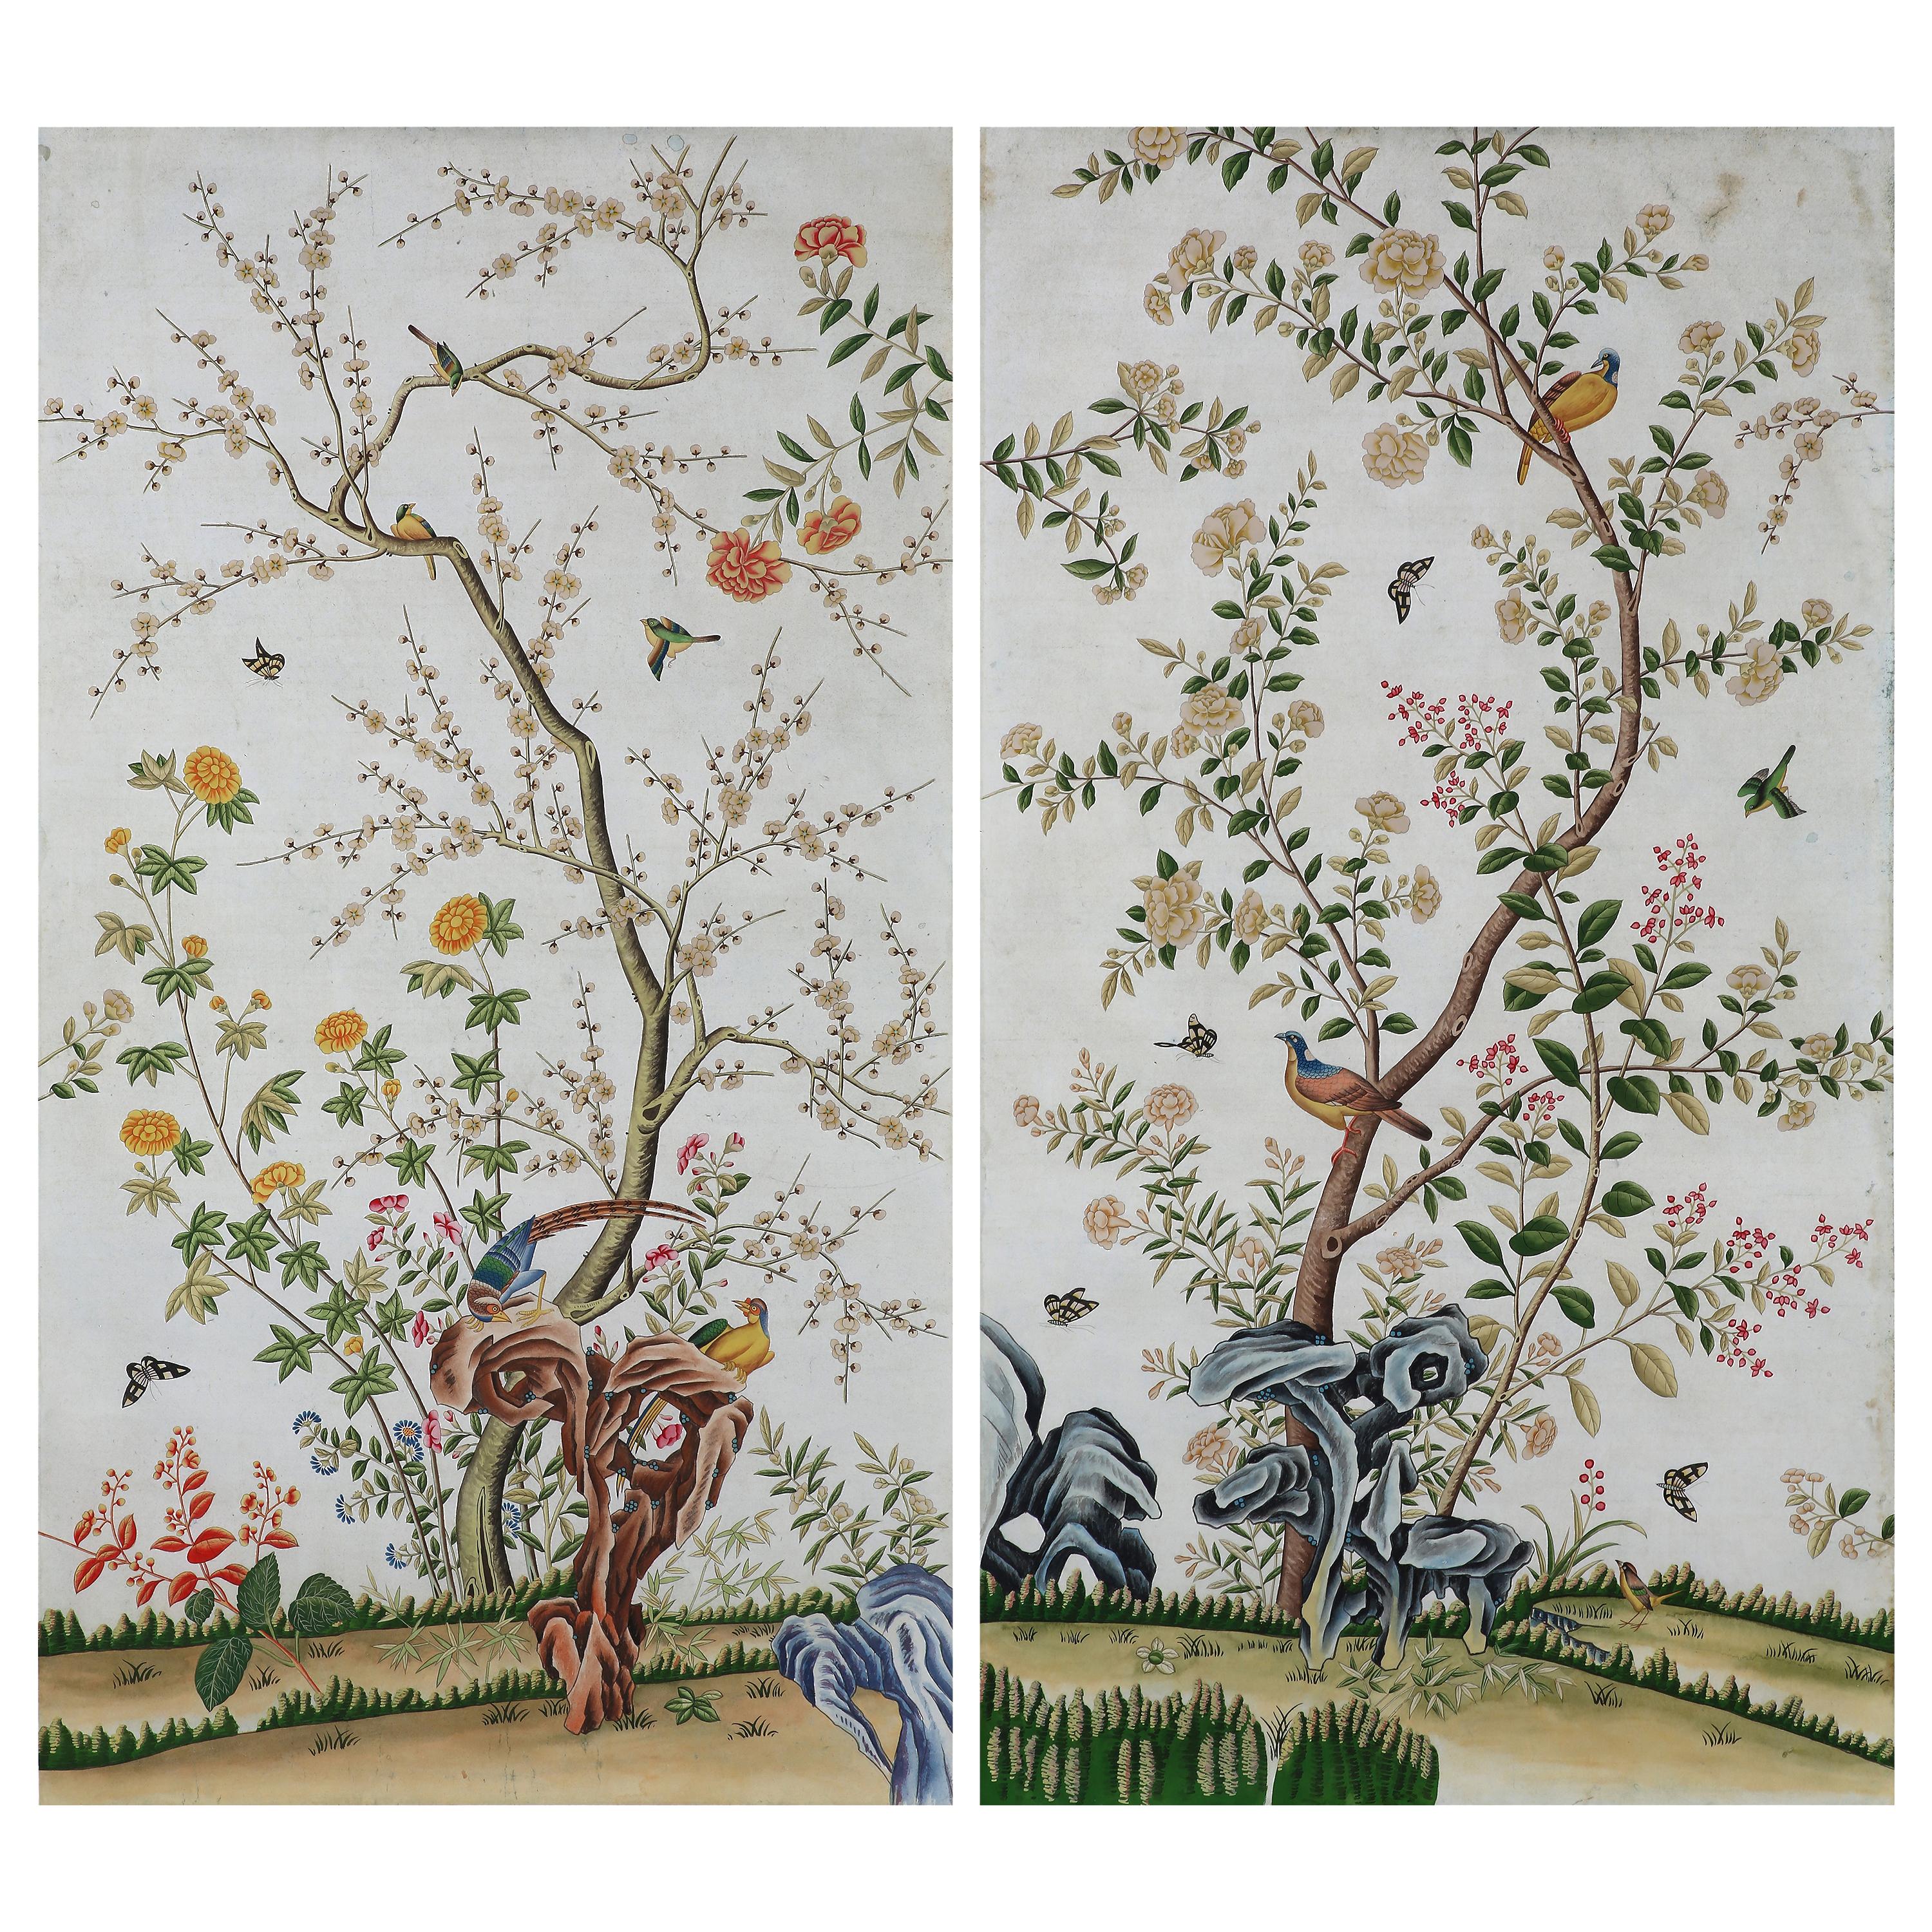 Unique Handpainted Wallpaper to Elevate Any Space